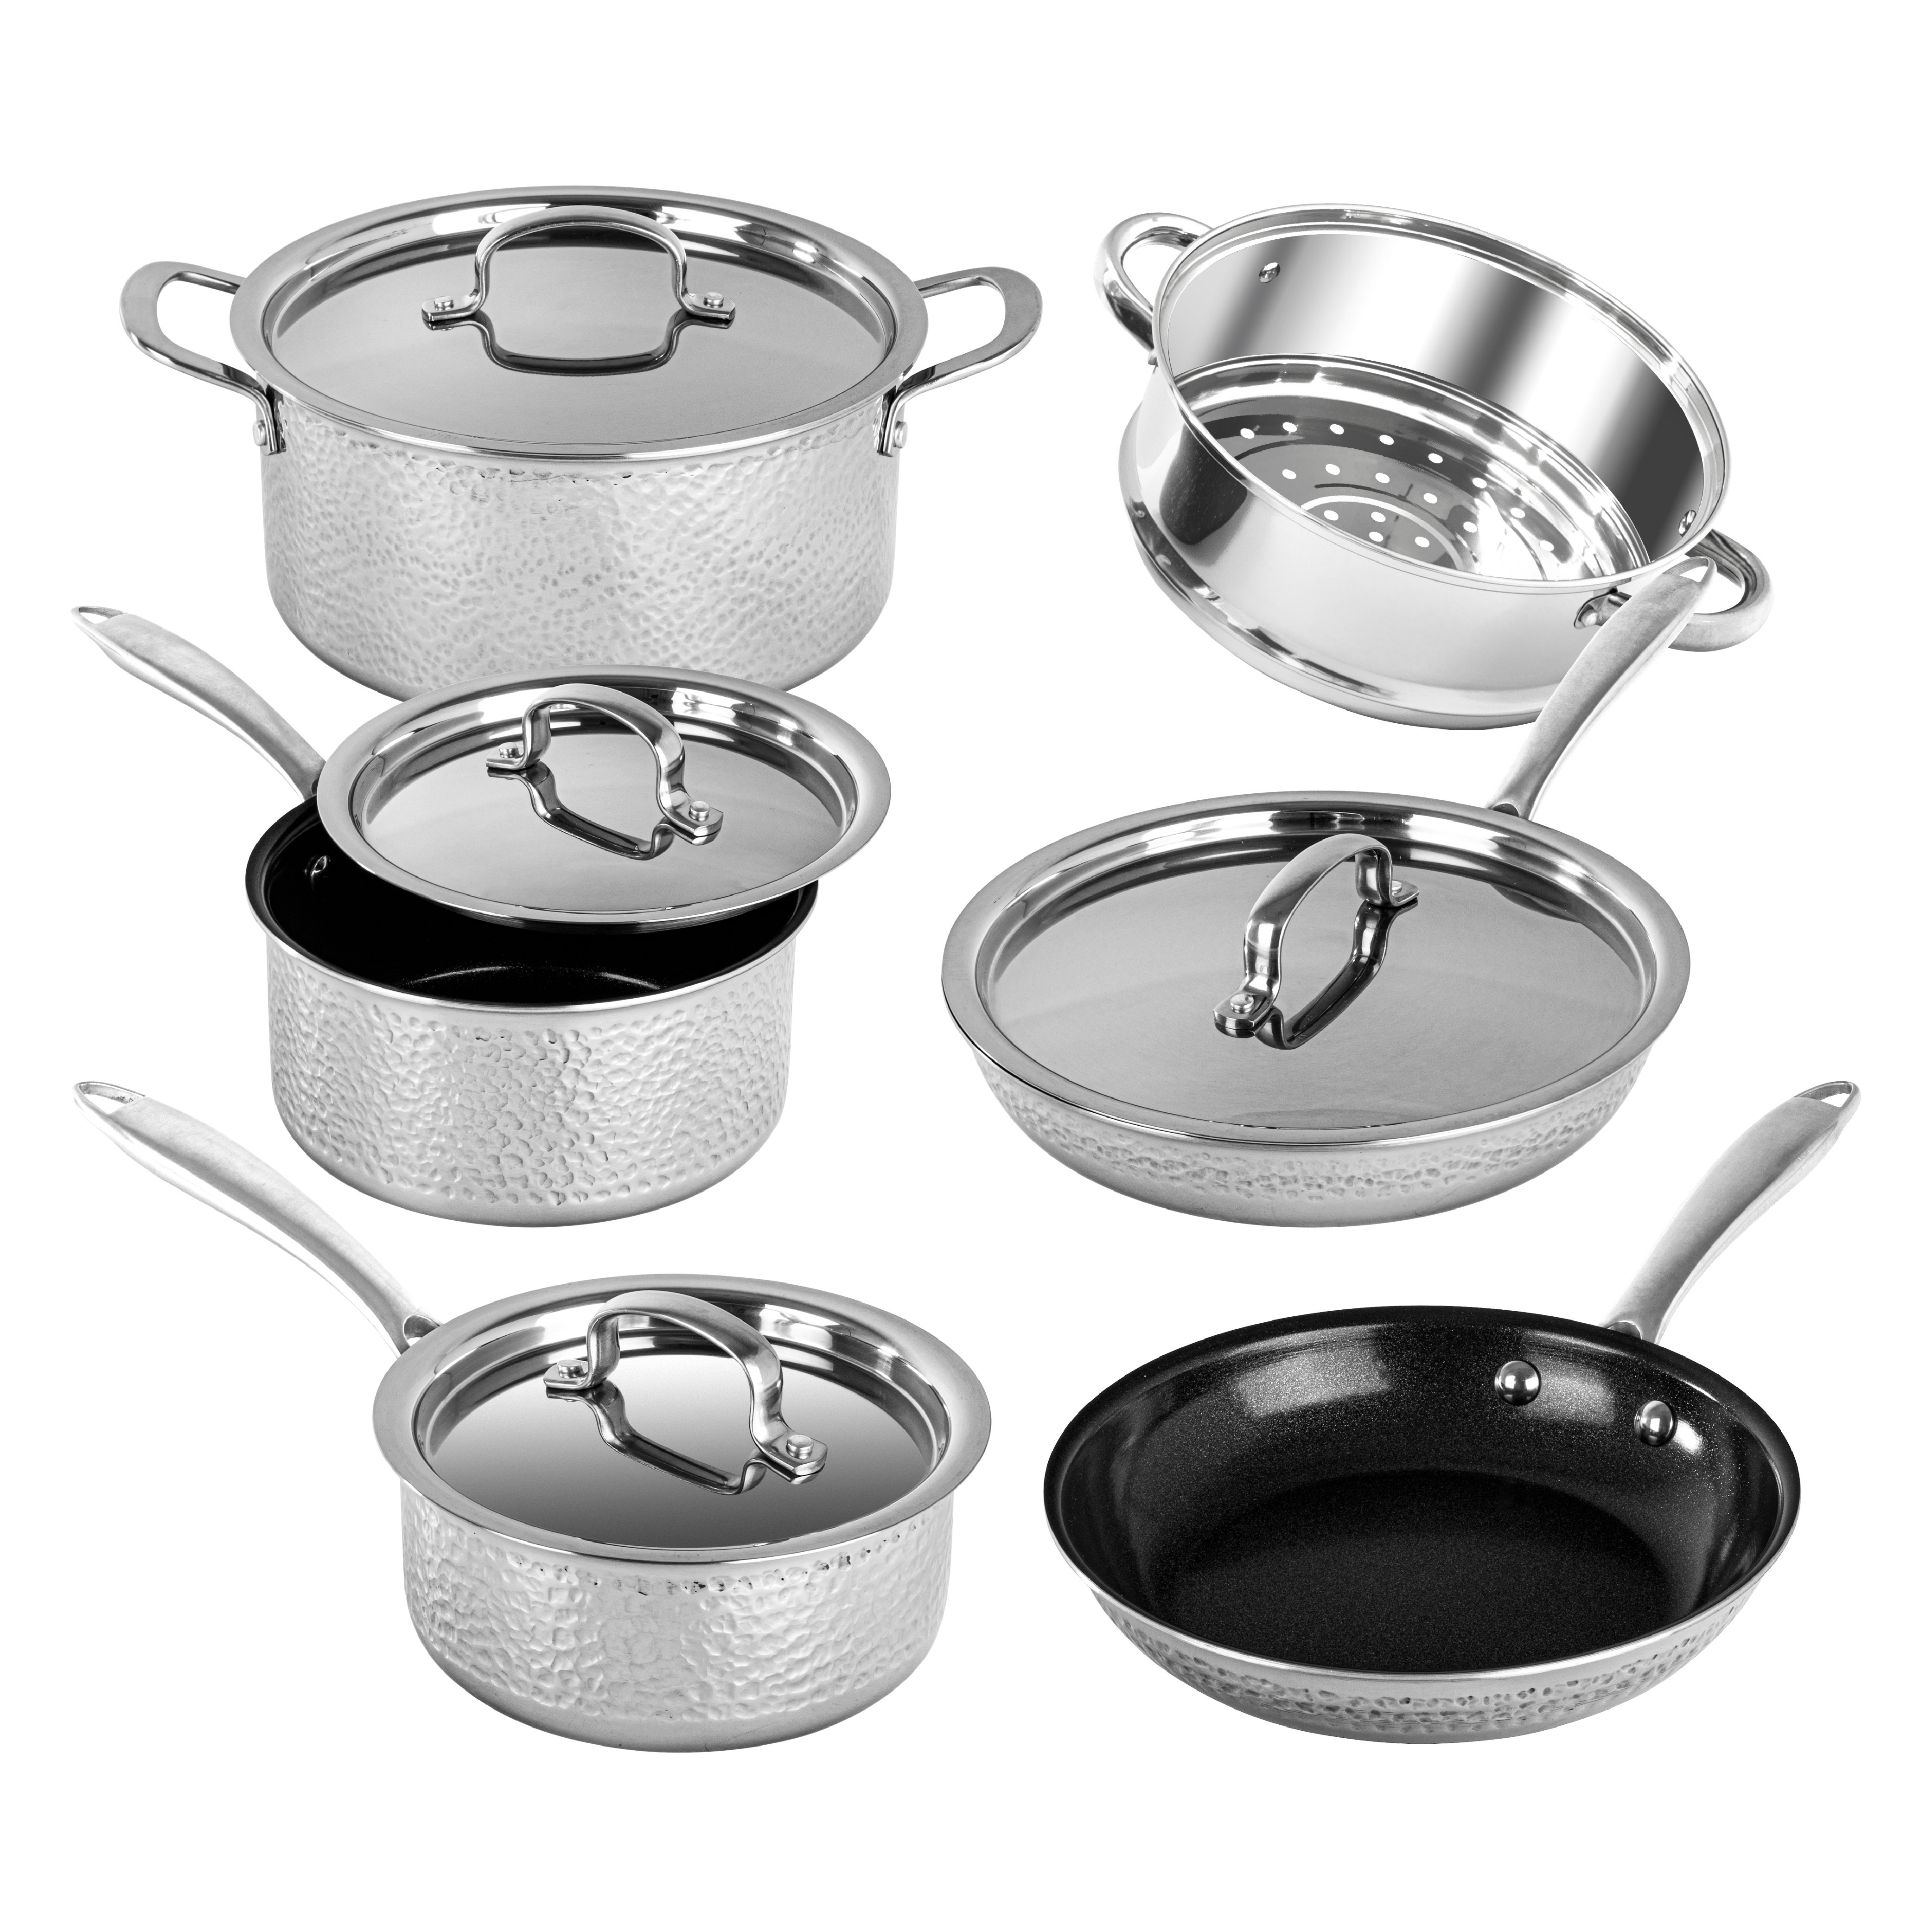 Granitestone Stainless Steel Hammered 10 Piece Nonstick Cookware Set, Stay  Cool Handles, Oven & Dishwasher Safe